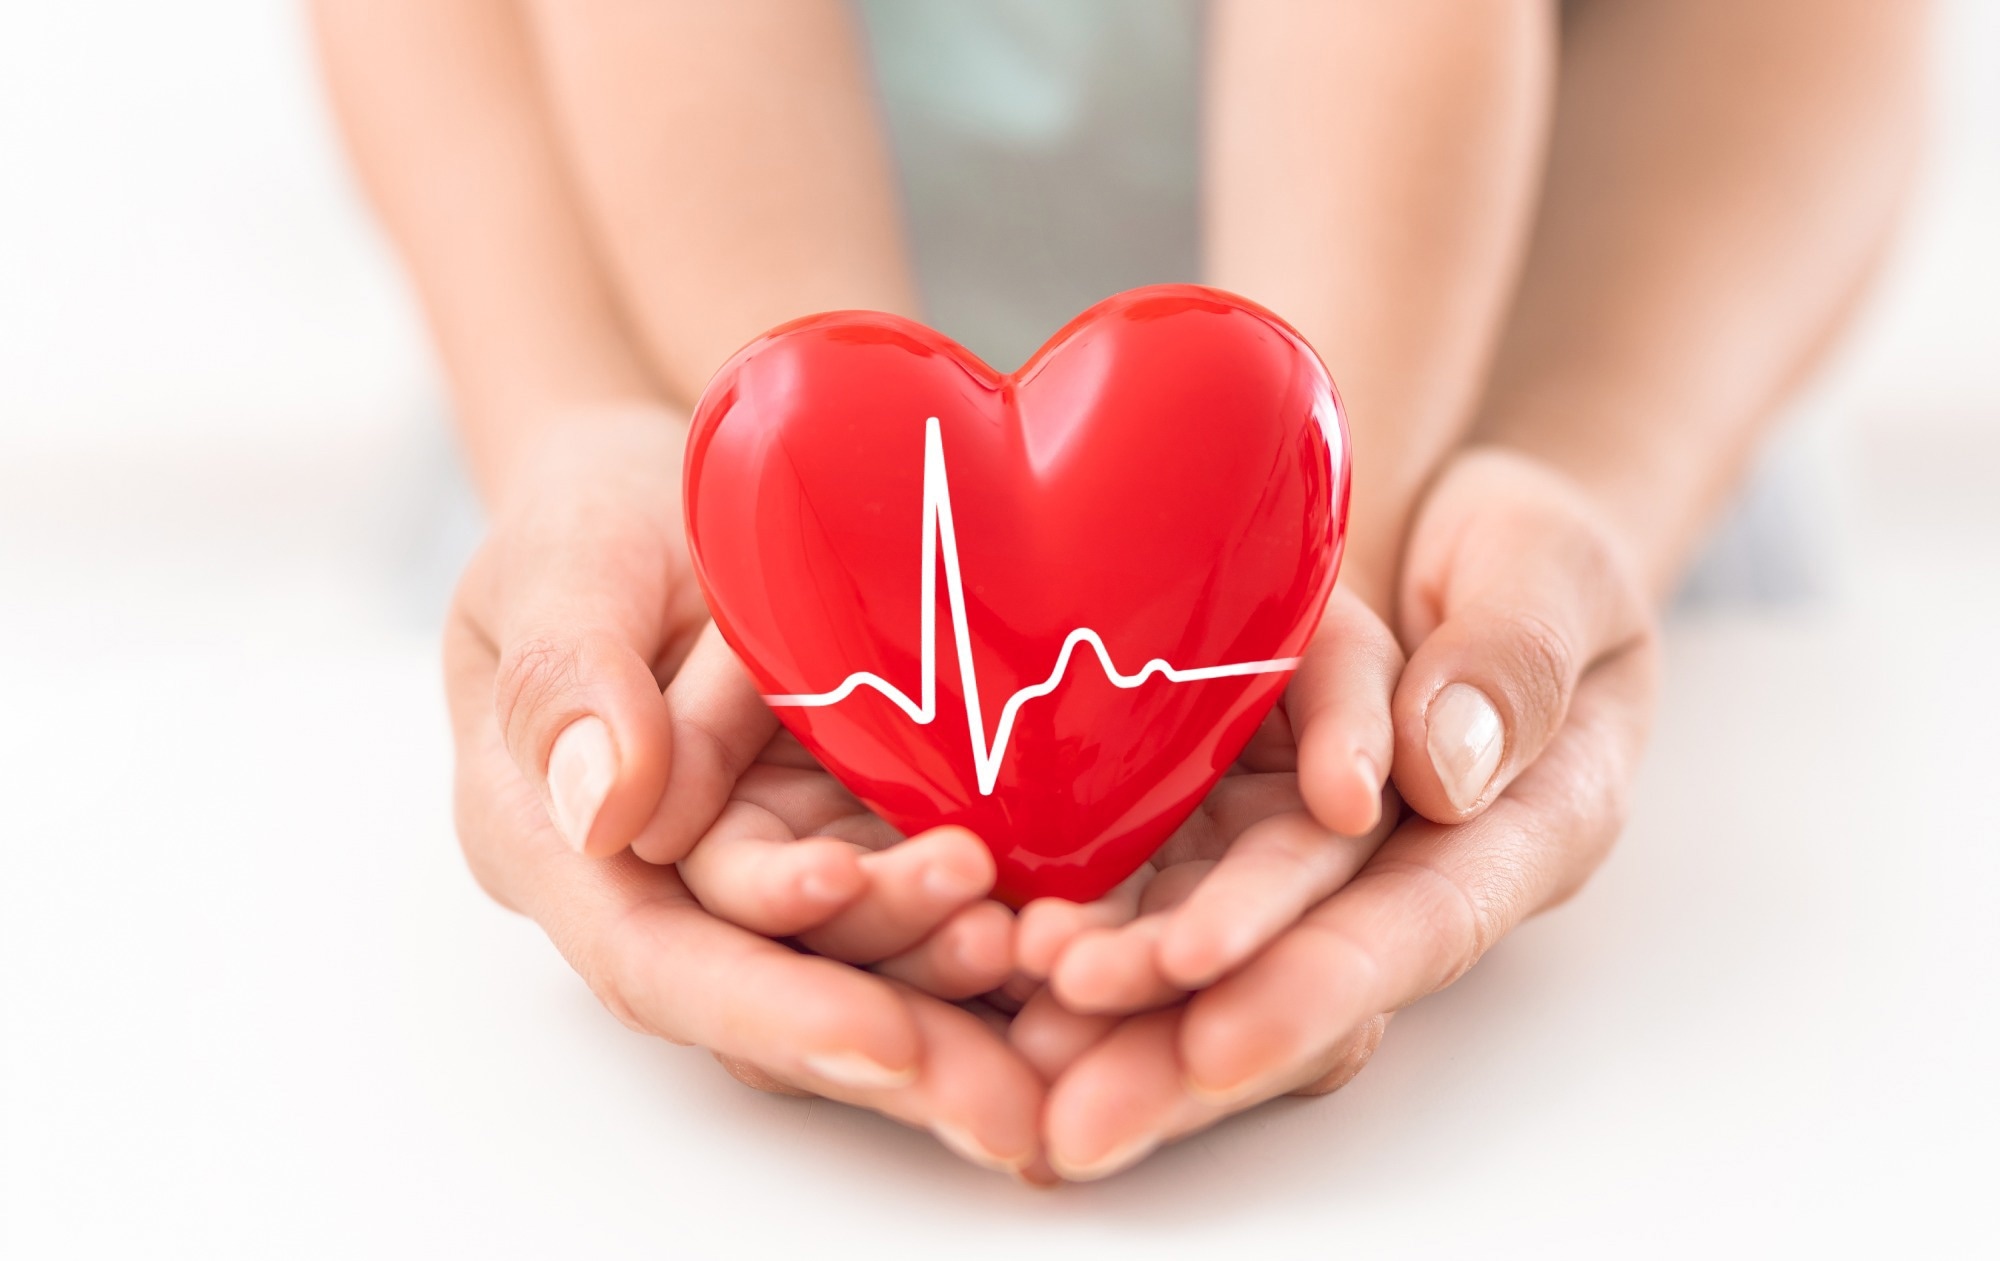 Study: Association of Home‐Based Cardiac Rehabilitation With Lower Mortality in Patients With Cardiovascular Disease: Results From the Veterans Health Administration Healthy Heart Program. Image Credit: REDPIXEL.PL / Shutterstock